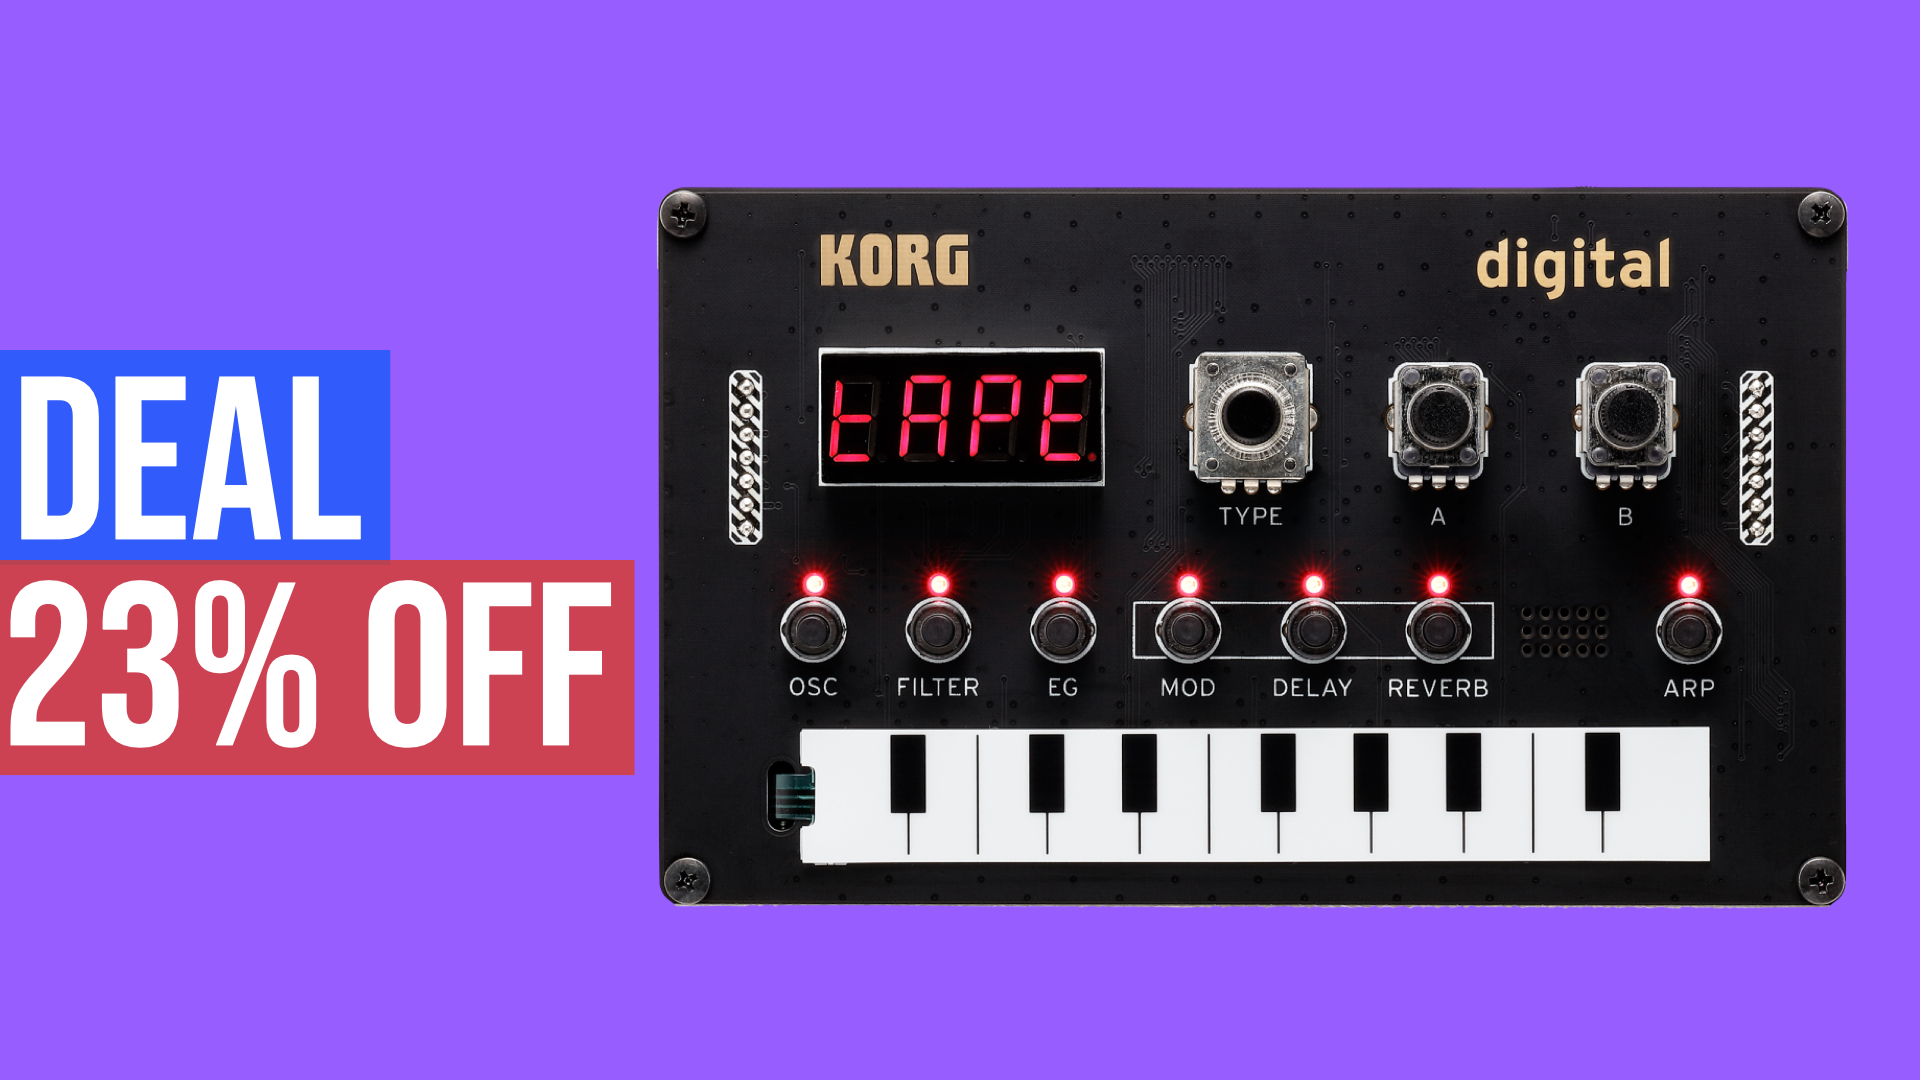 Deal: save 23% on the Korg NTS-1 digital Synthesizer